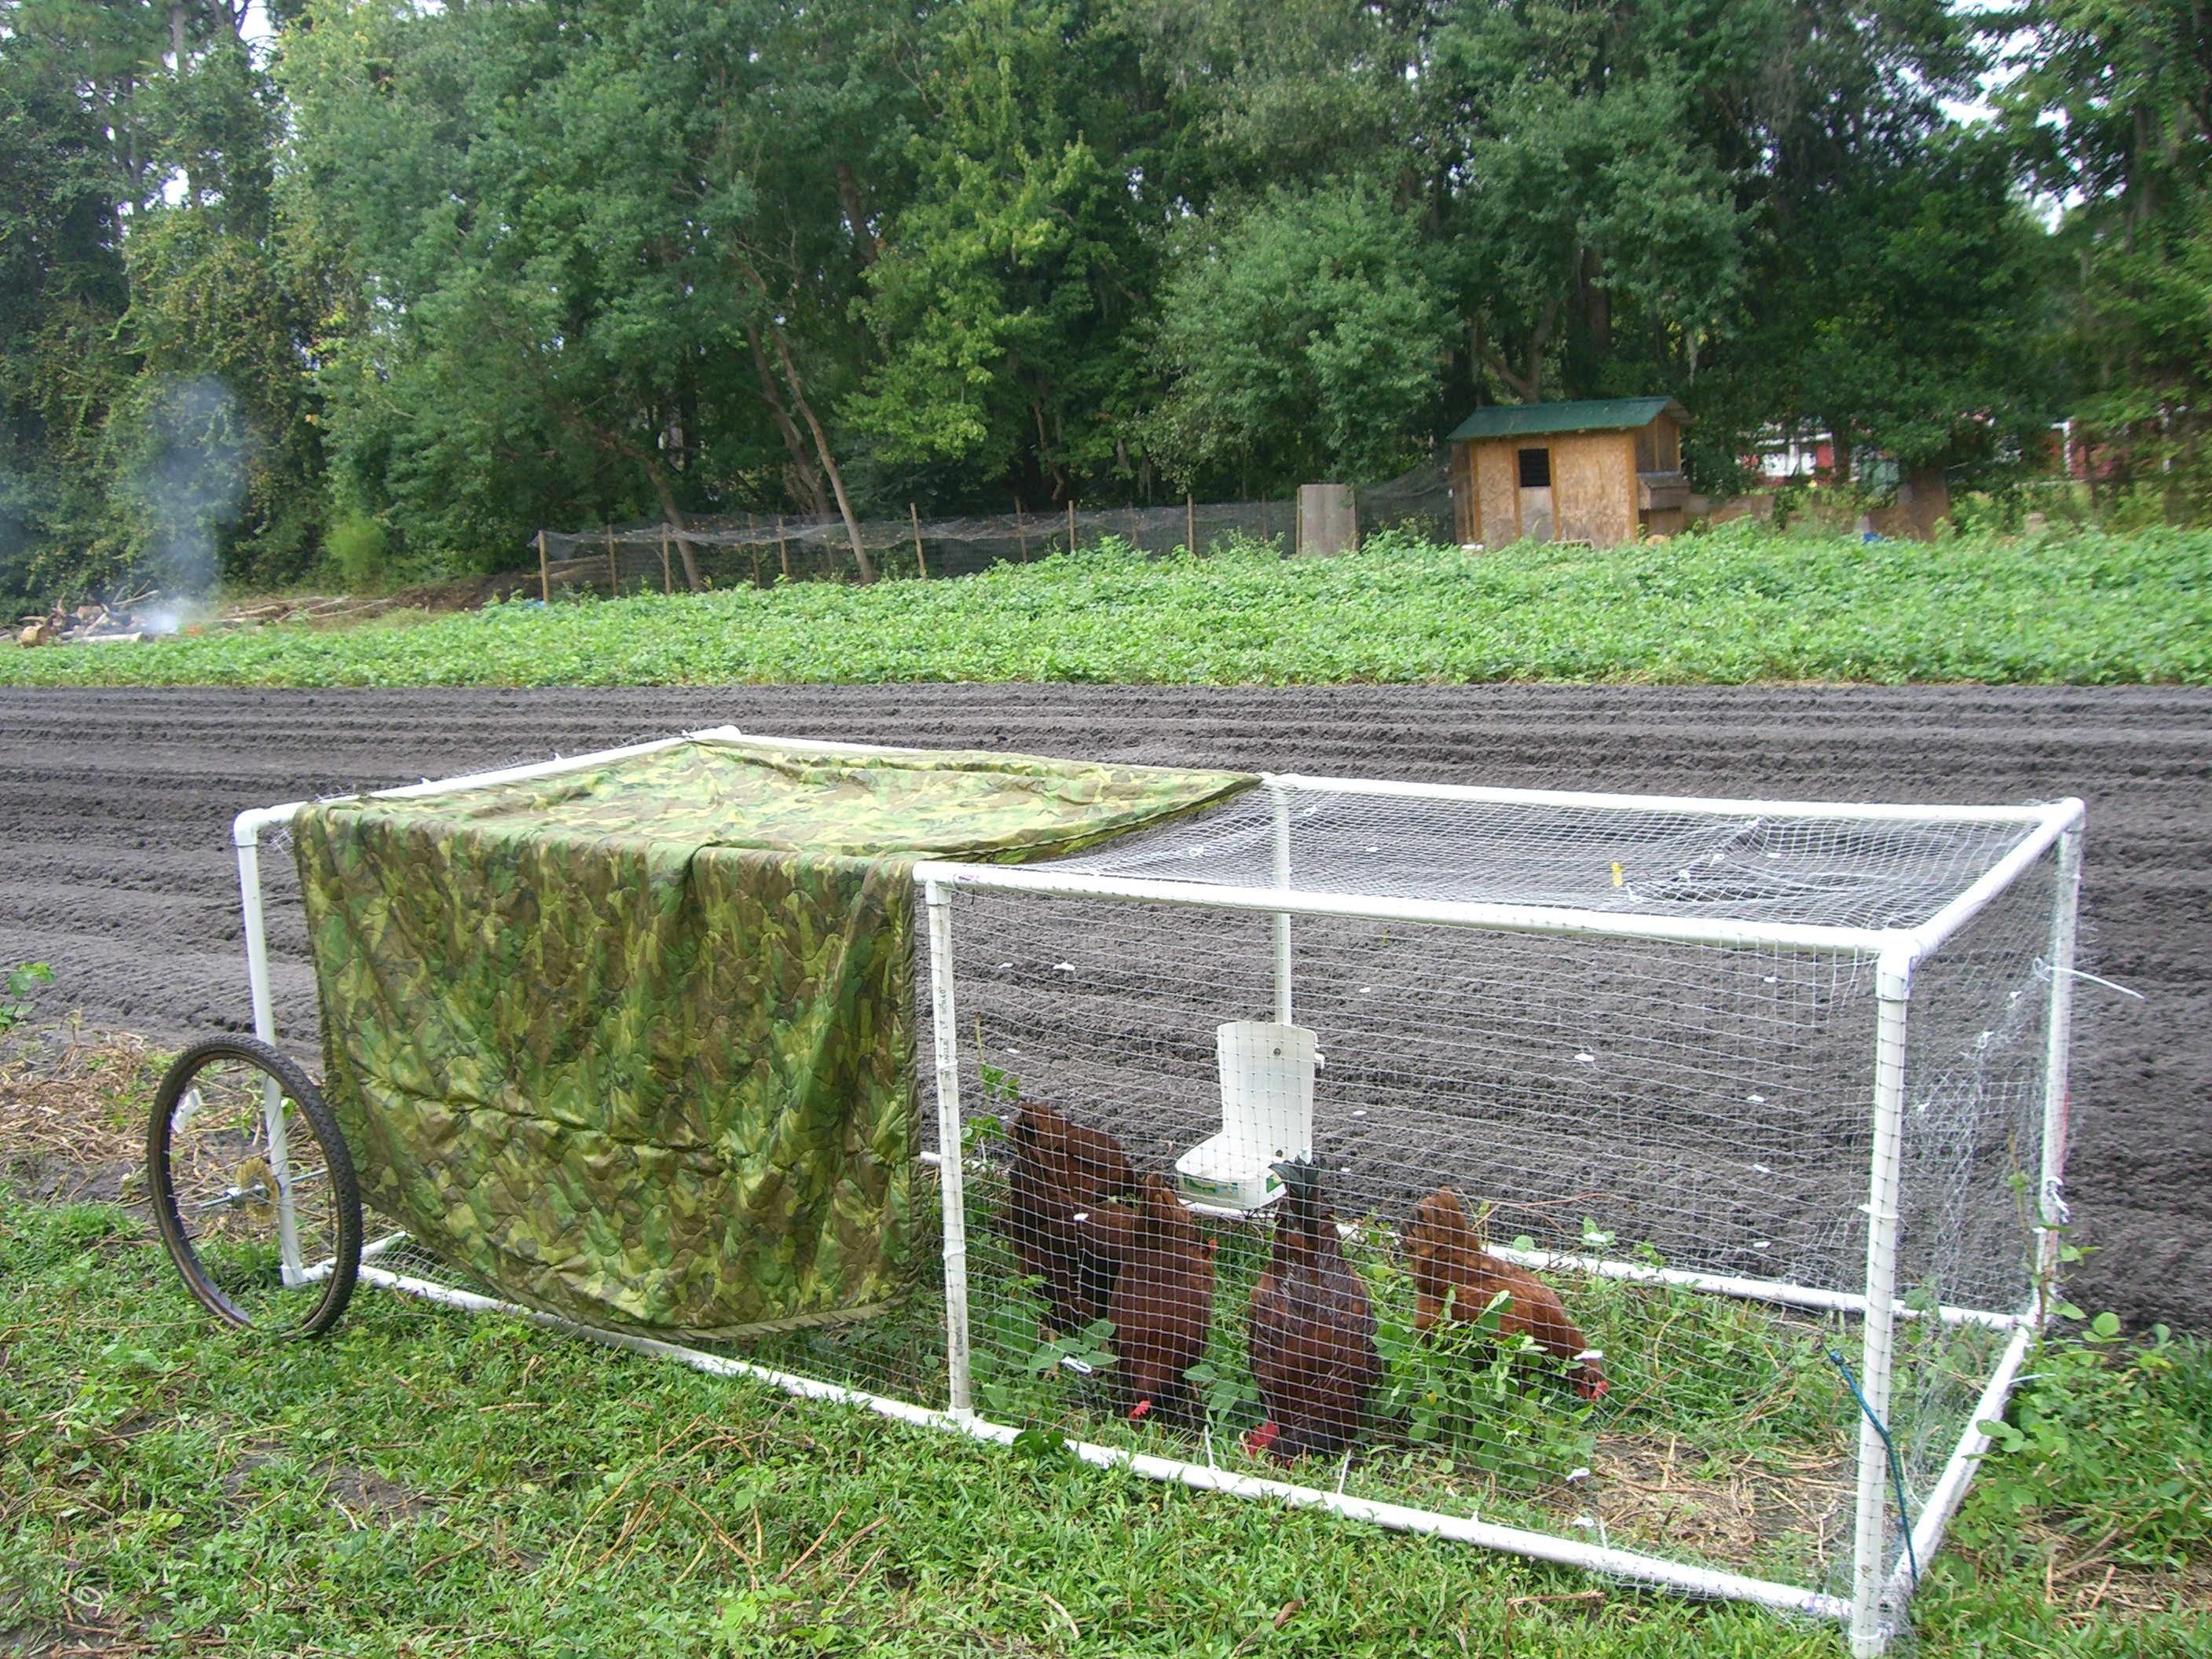 The Chicken Tractor Down to Earth Farm, Jacksonville